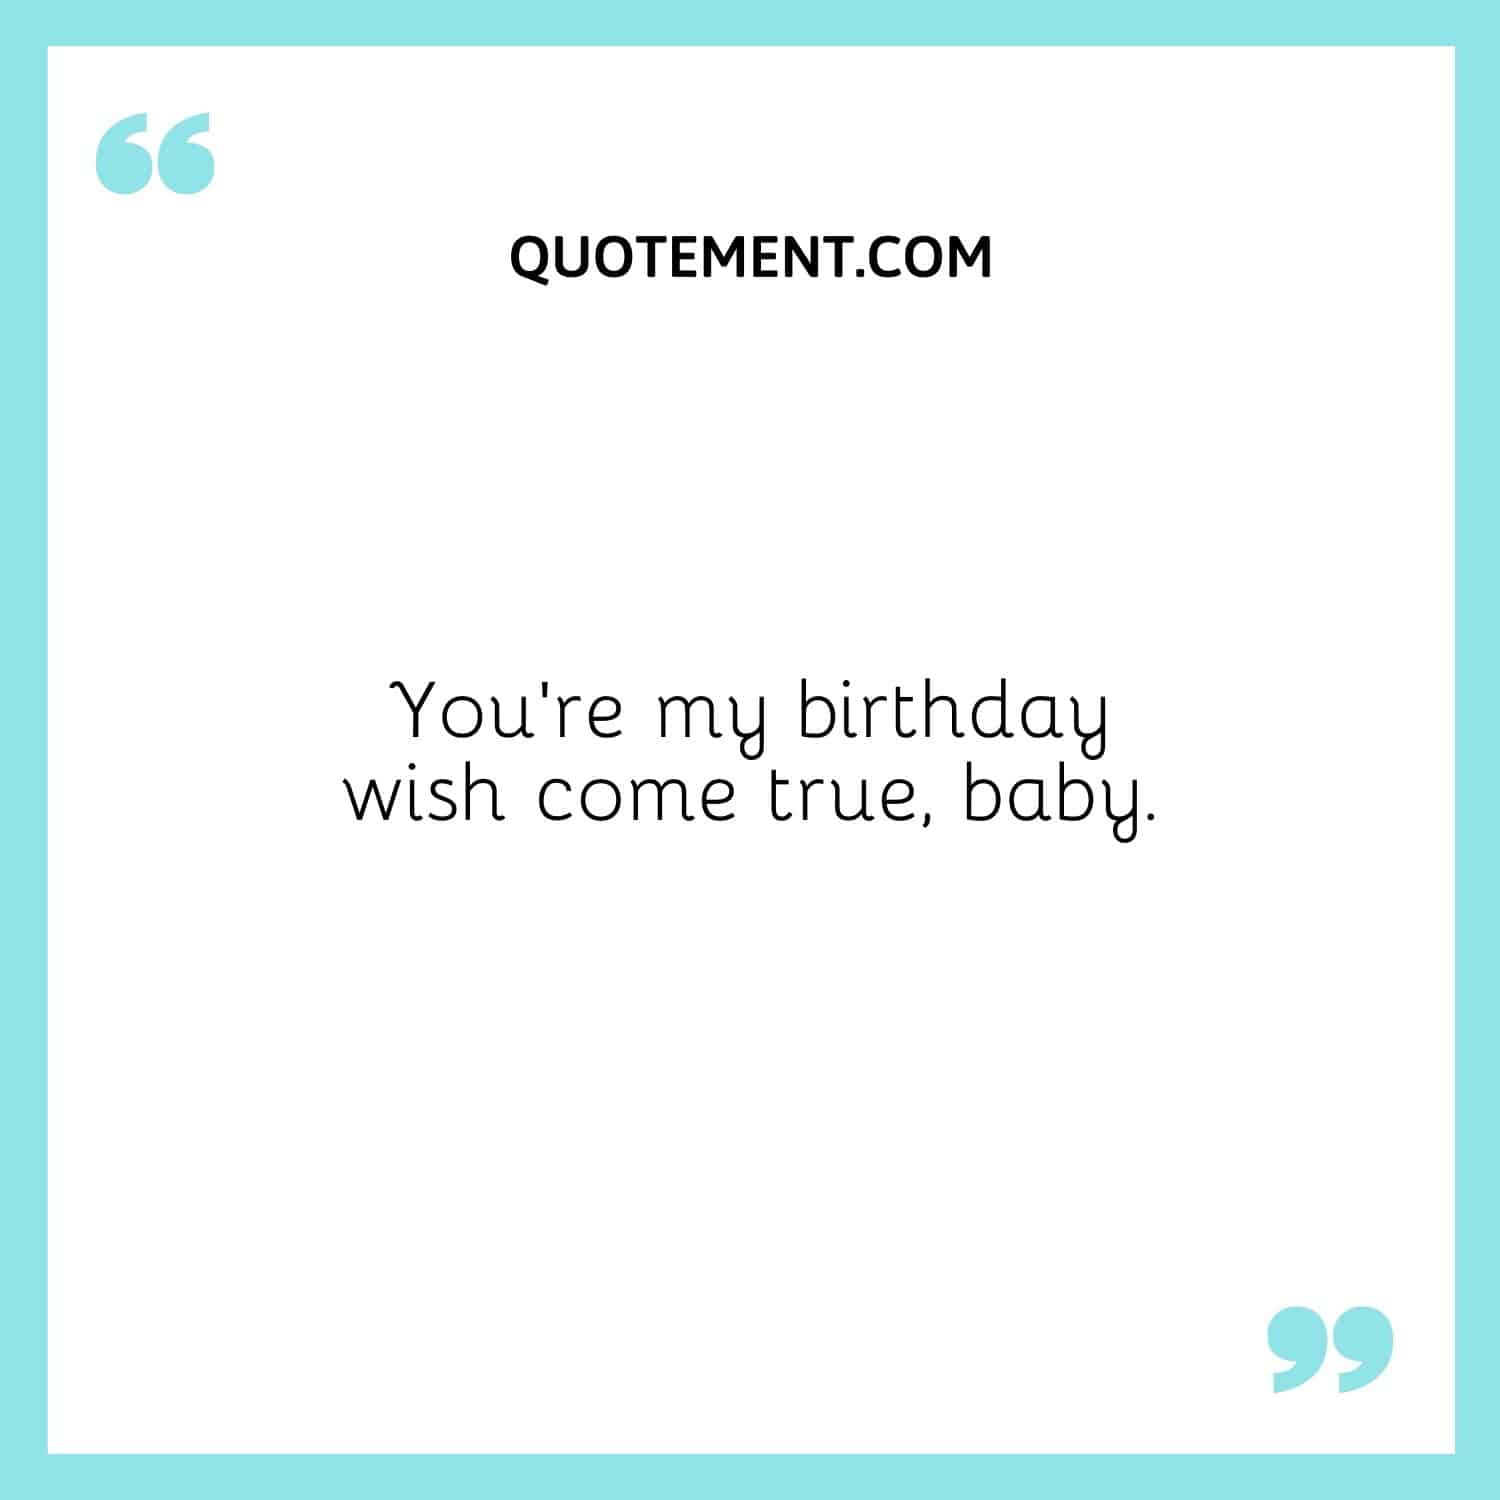 You’re my birthday wish come true, baby